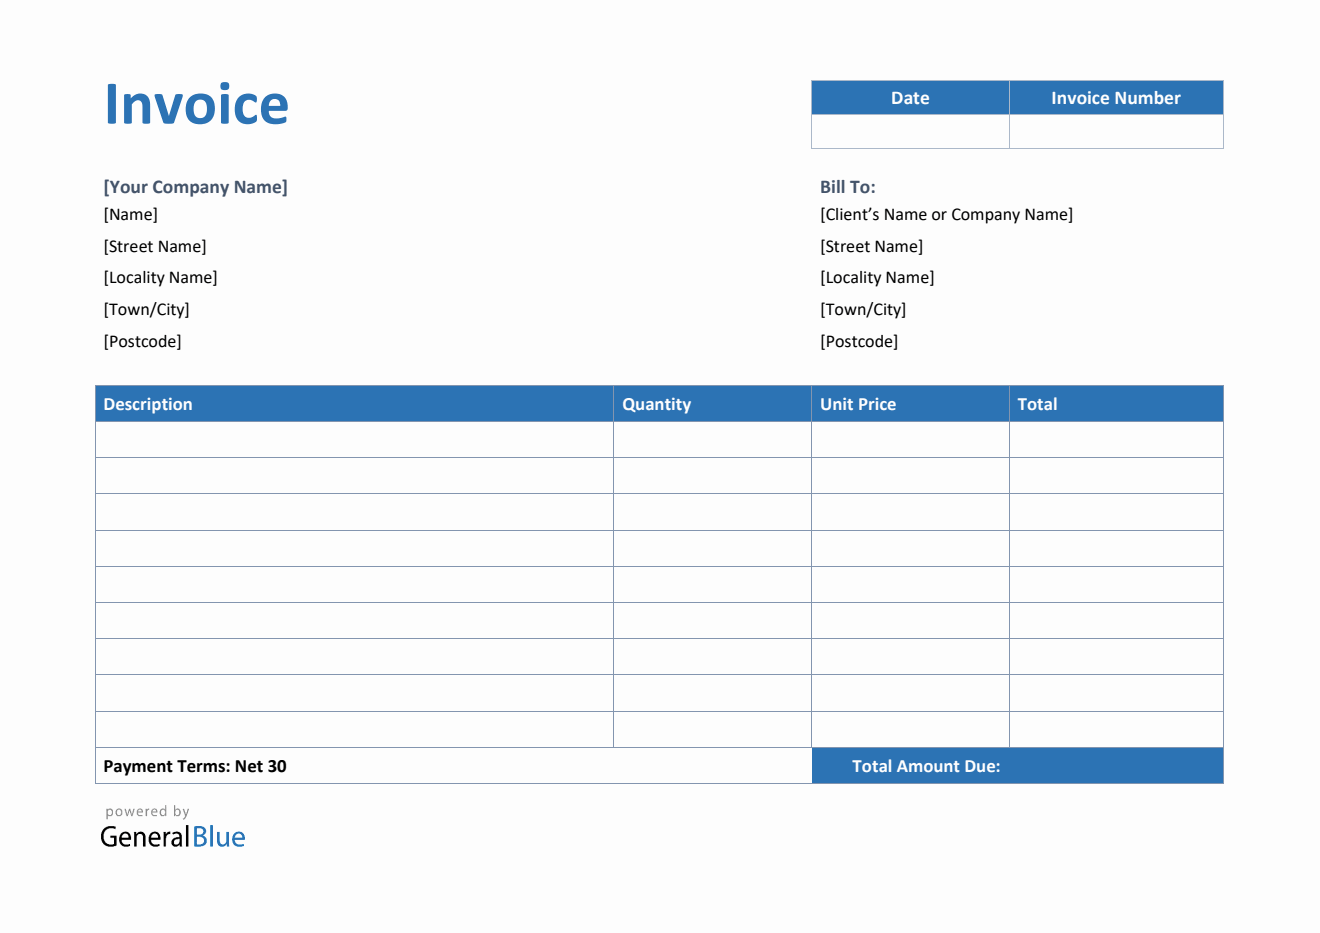 Invoice Template for U.K. in Word (Colorful)